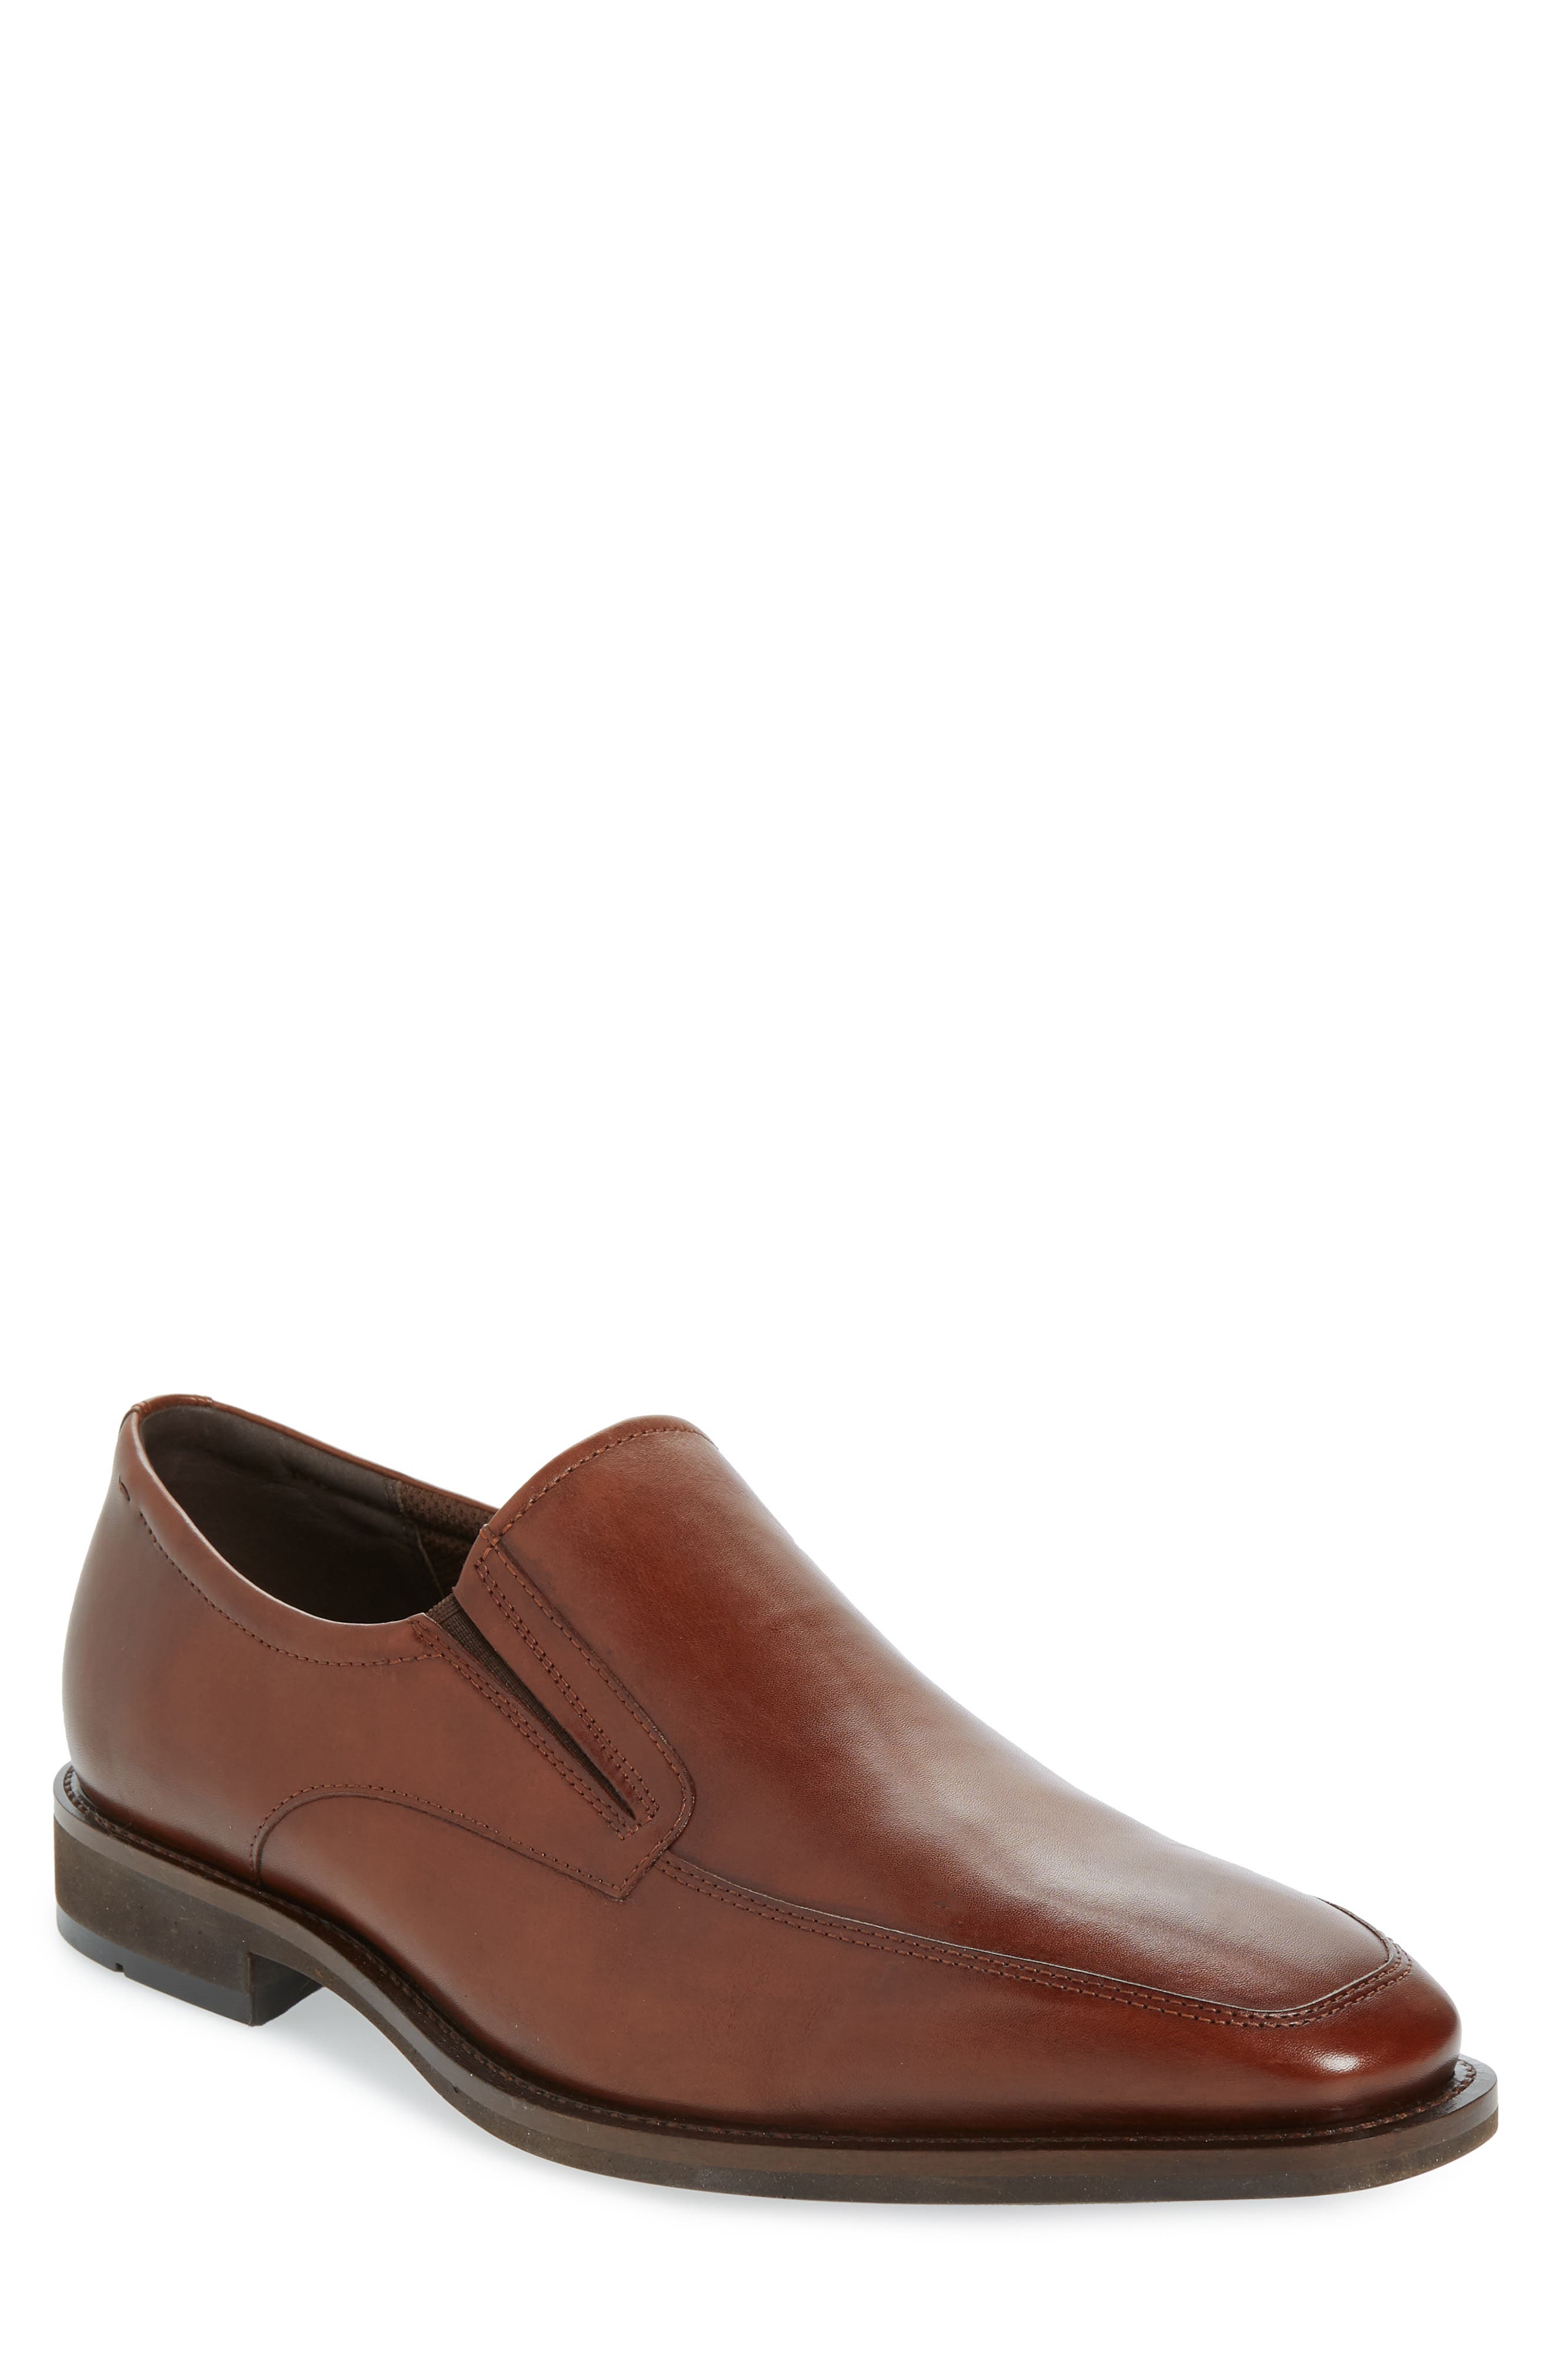 slip on leather dress shoes